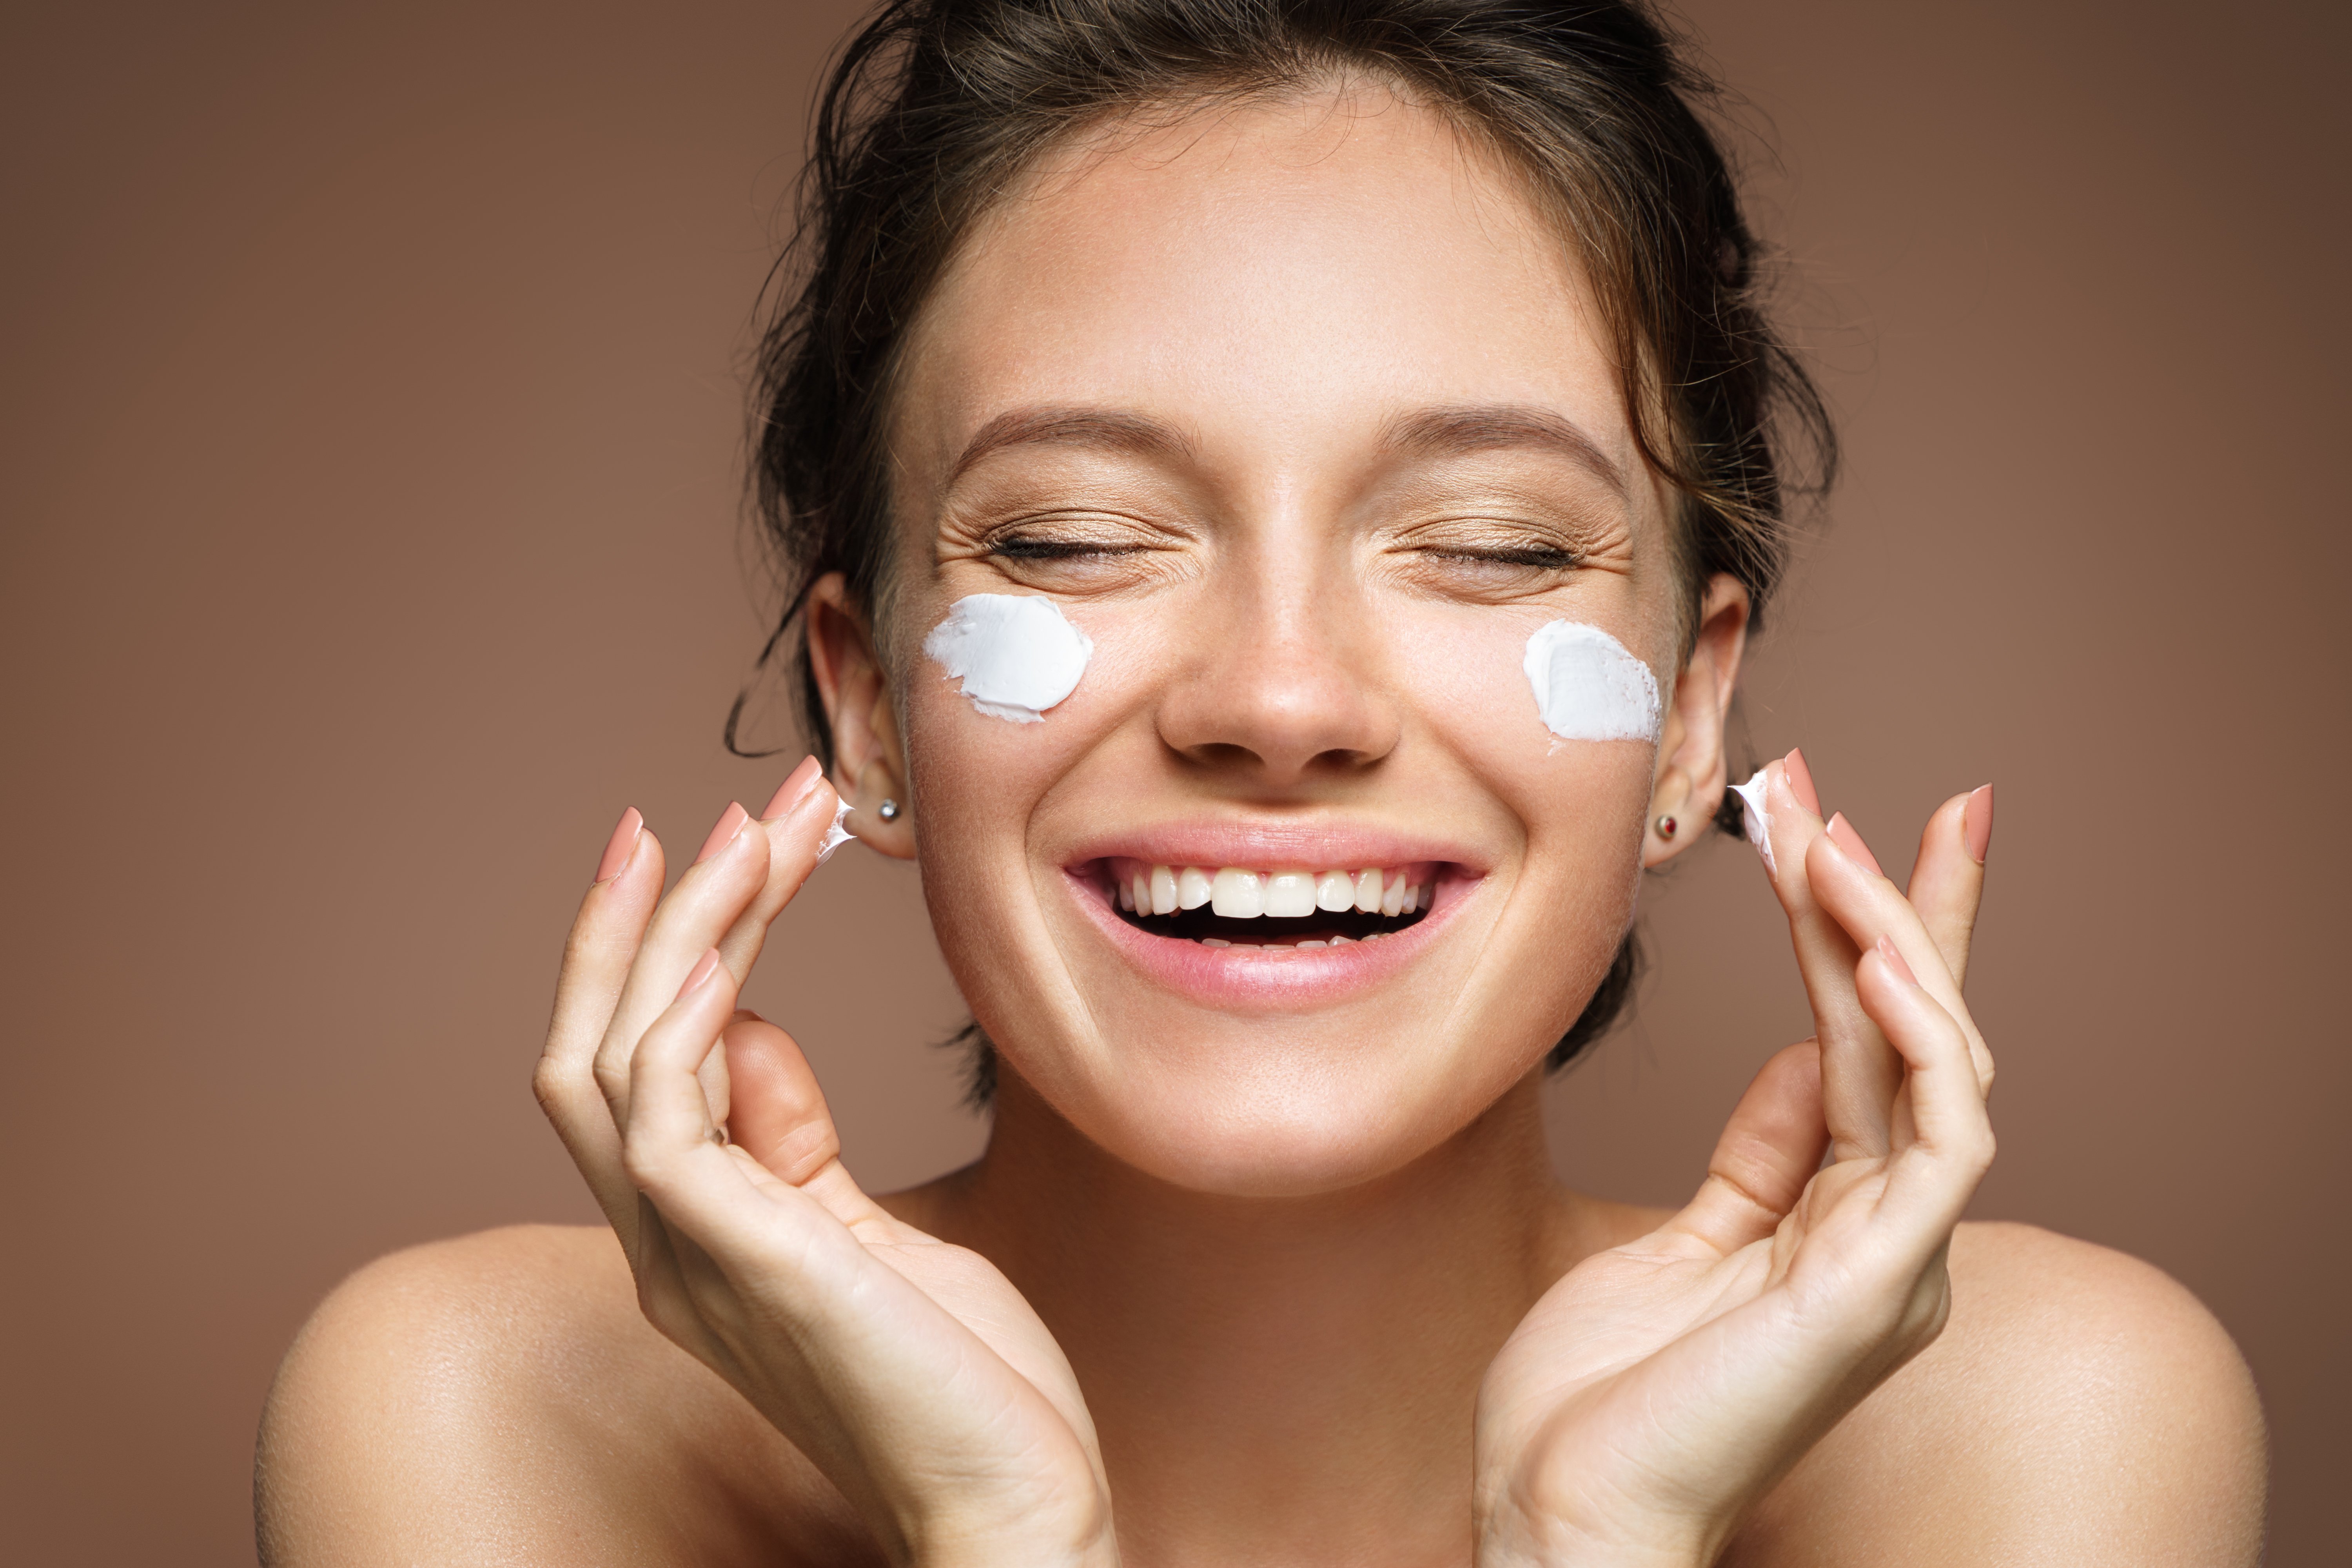 Woman smiling while applying moisturizer. | Source: Shutterstock